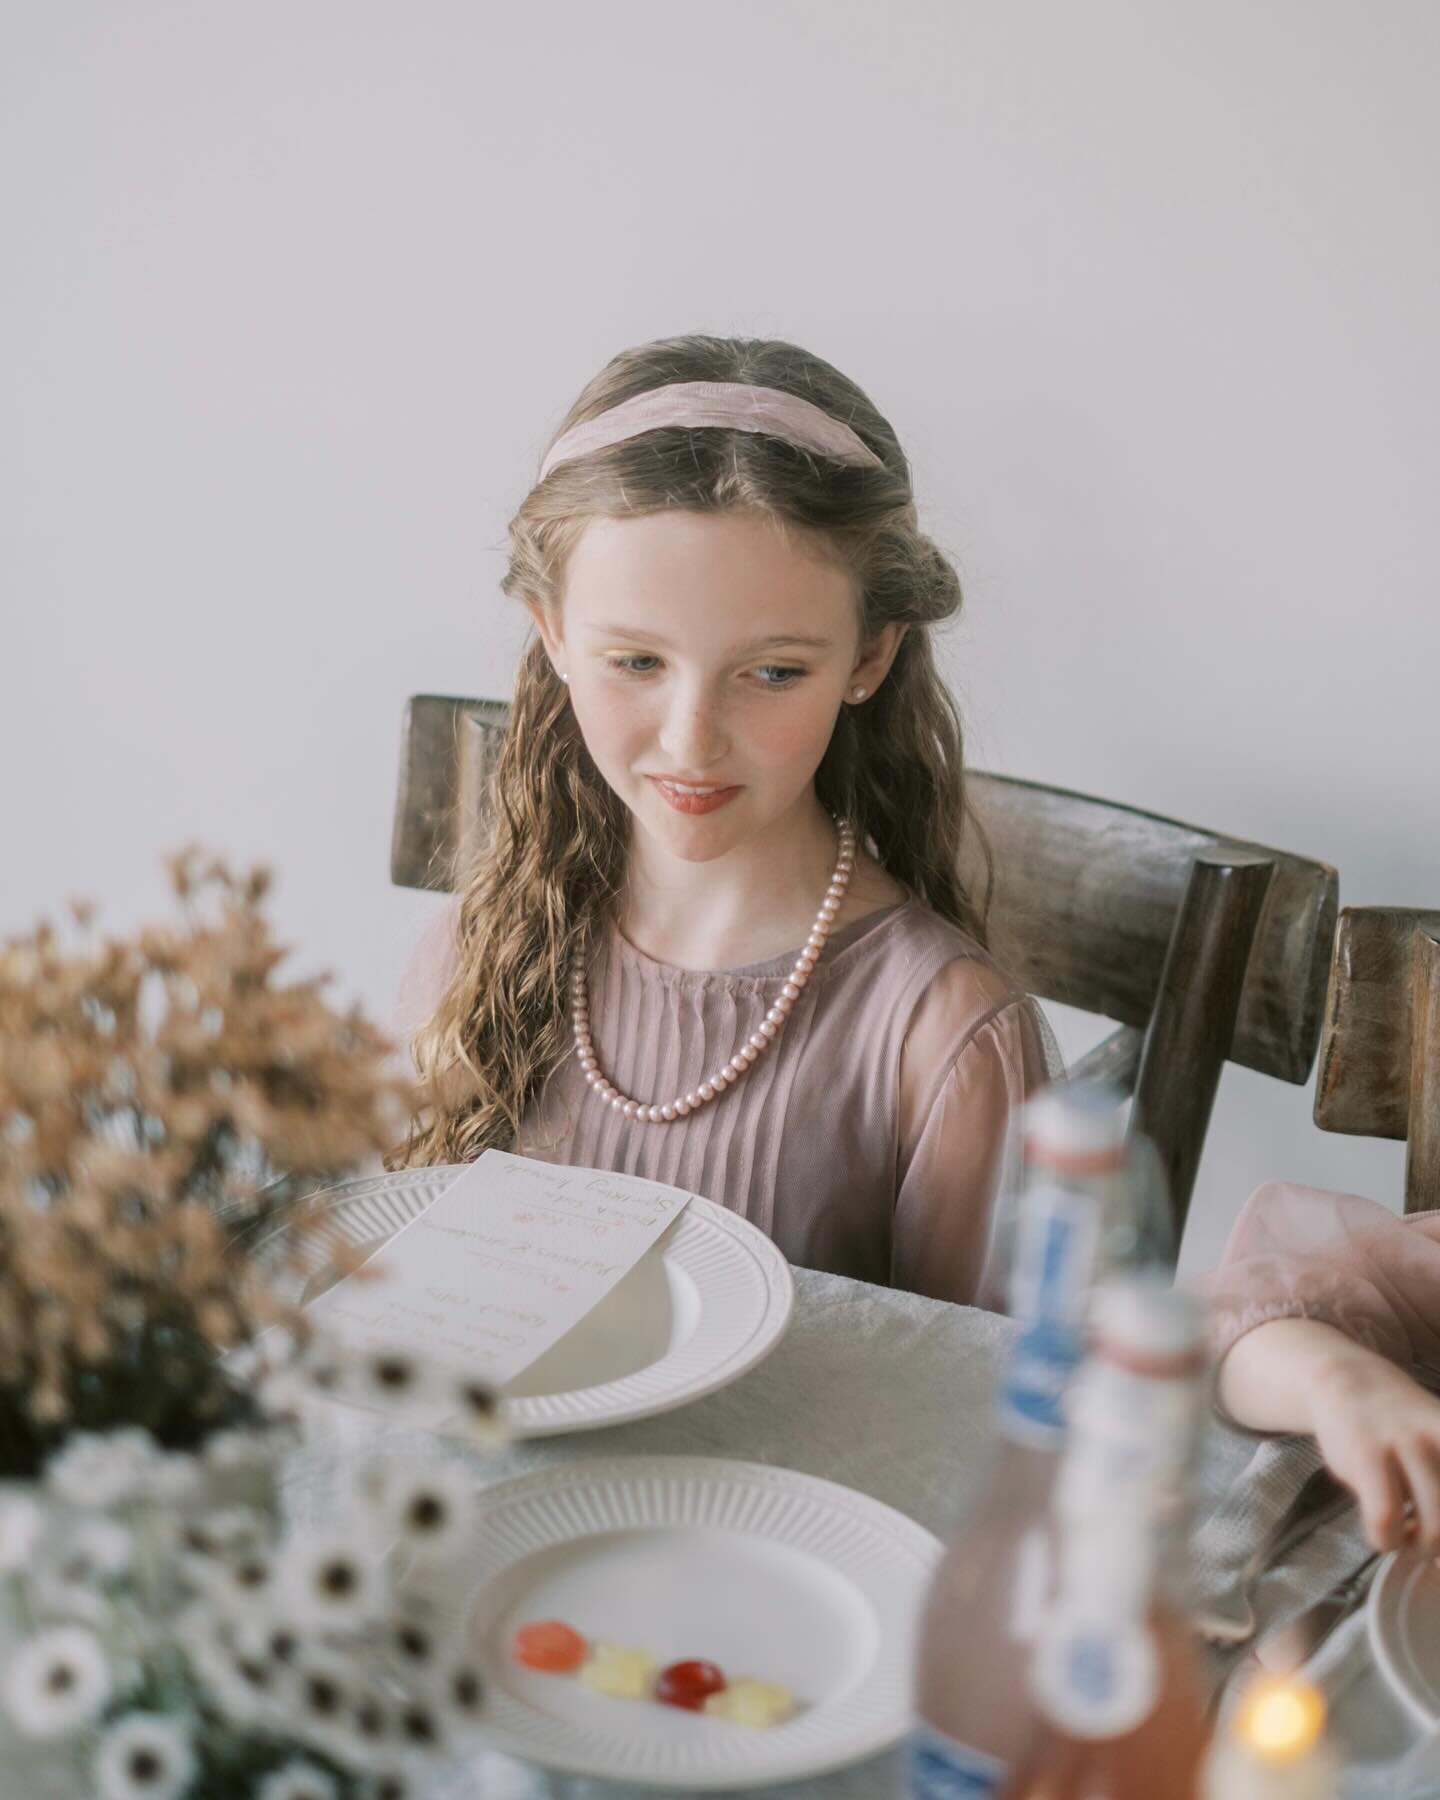 It&rsquo;s been a while since I caught up on memories. The girls had their second annual dinner date with daddy at home around Valentine&rsquo;s Day. With all these special days, my motto is: it doesn&rsquo;t have to be extravagant to be special. A f